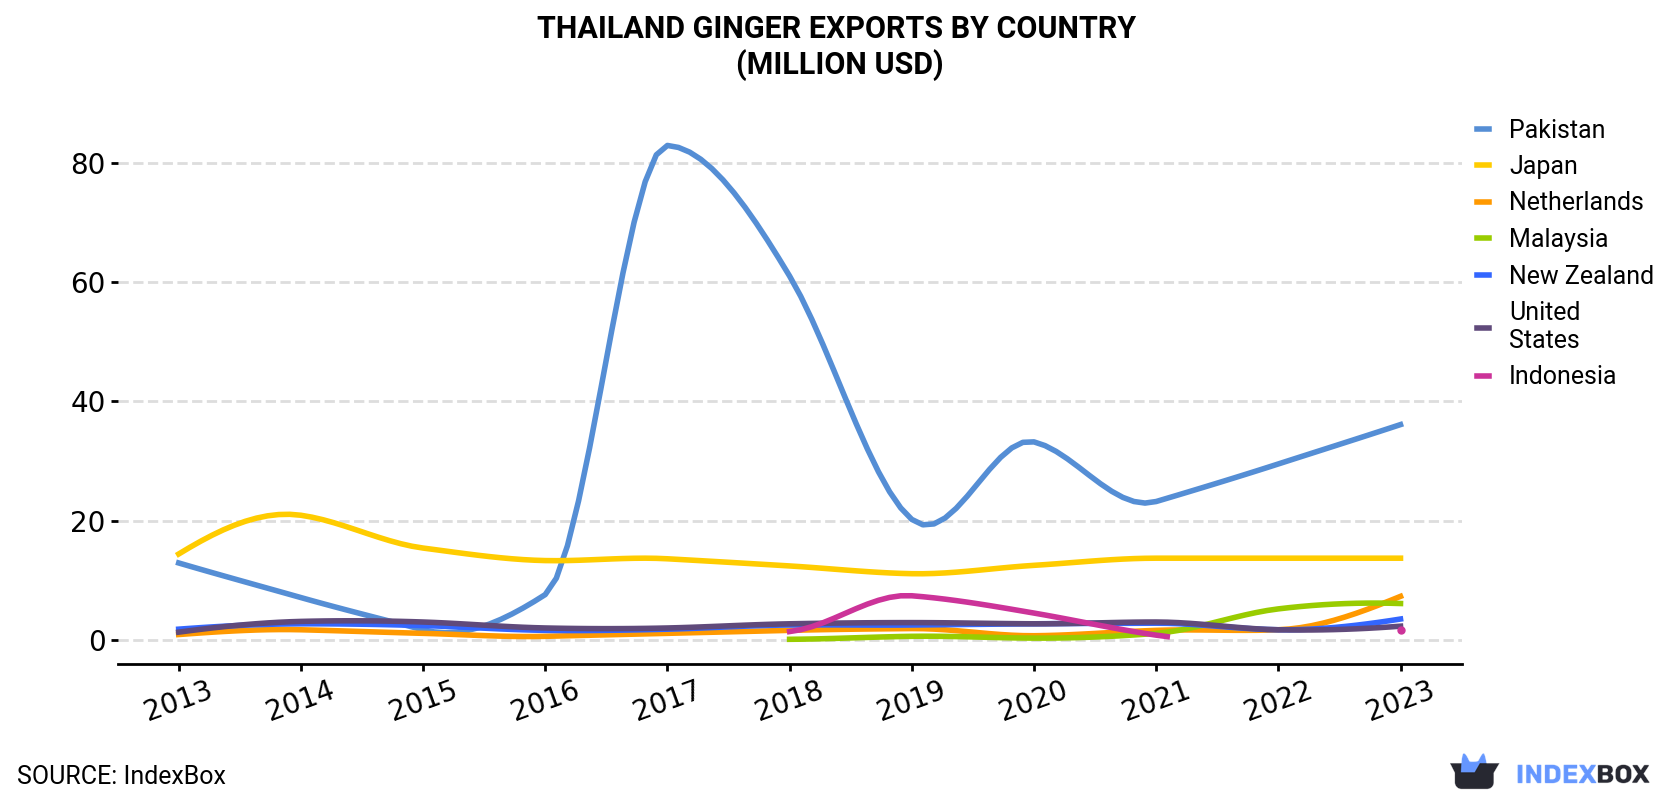 Thailand Ginger Exports By Country (Million USD)